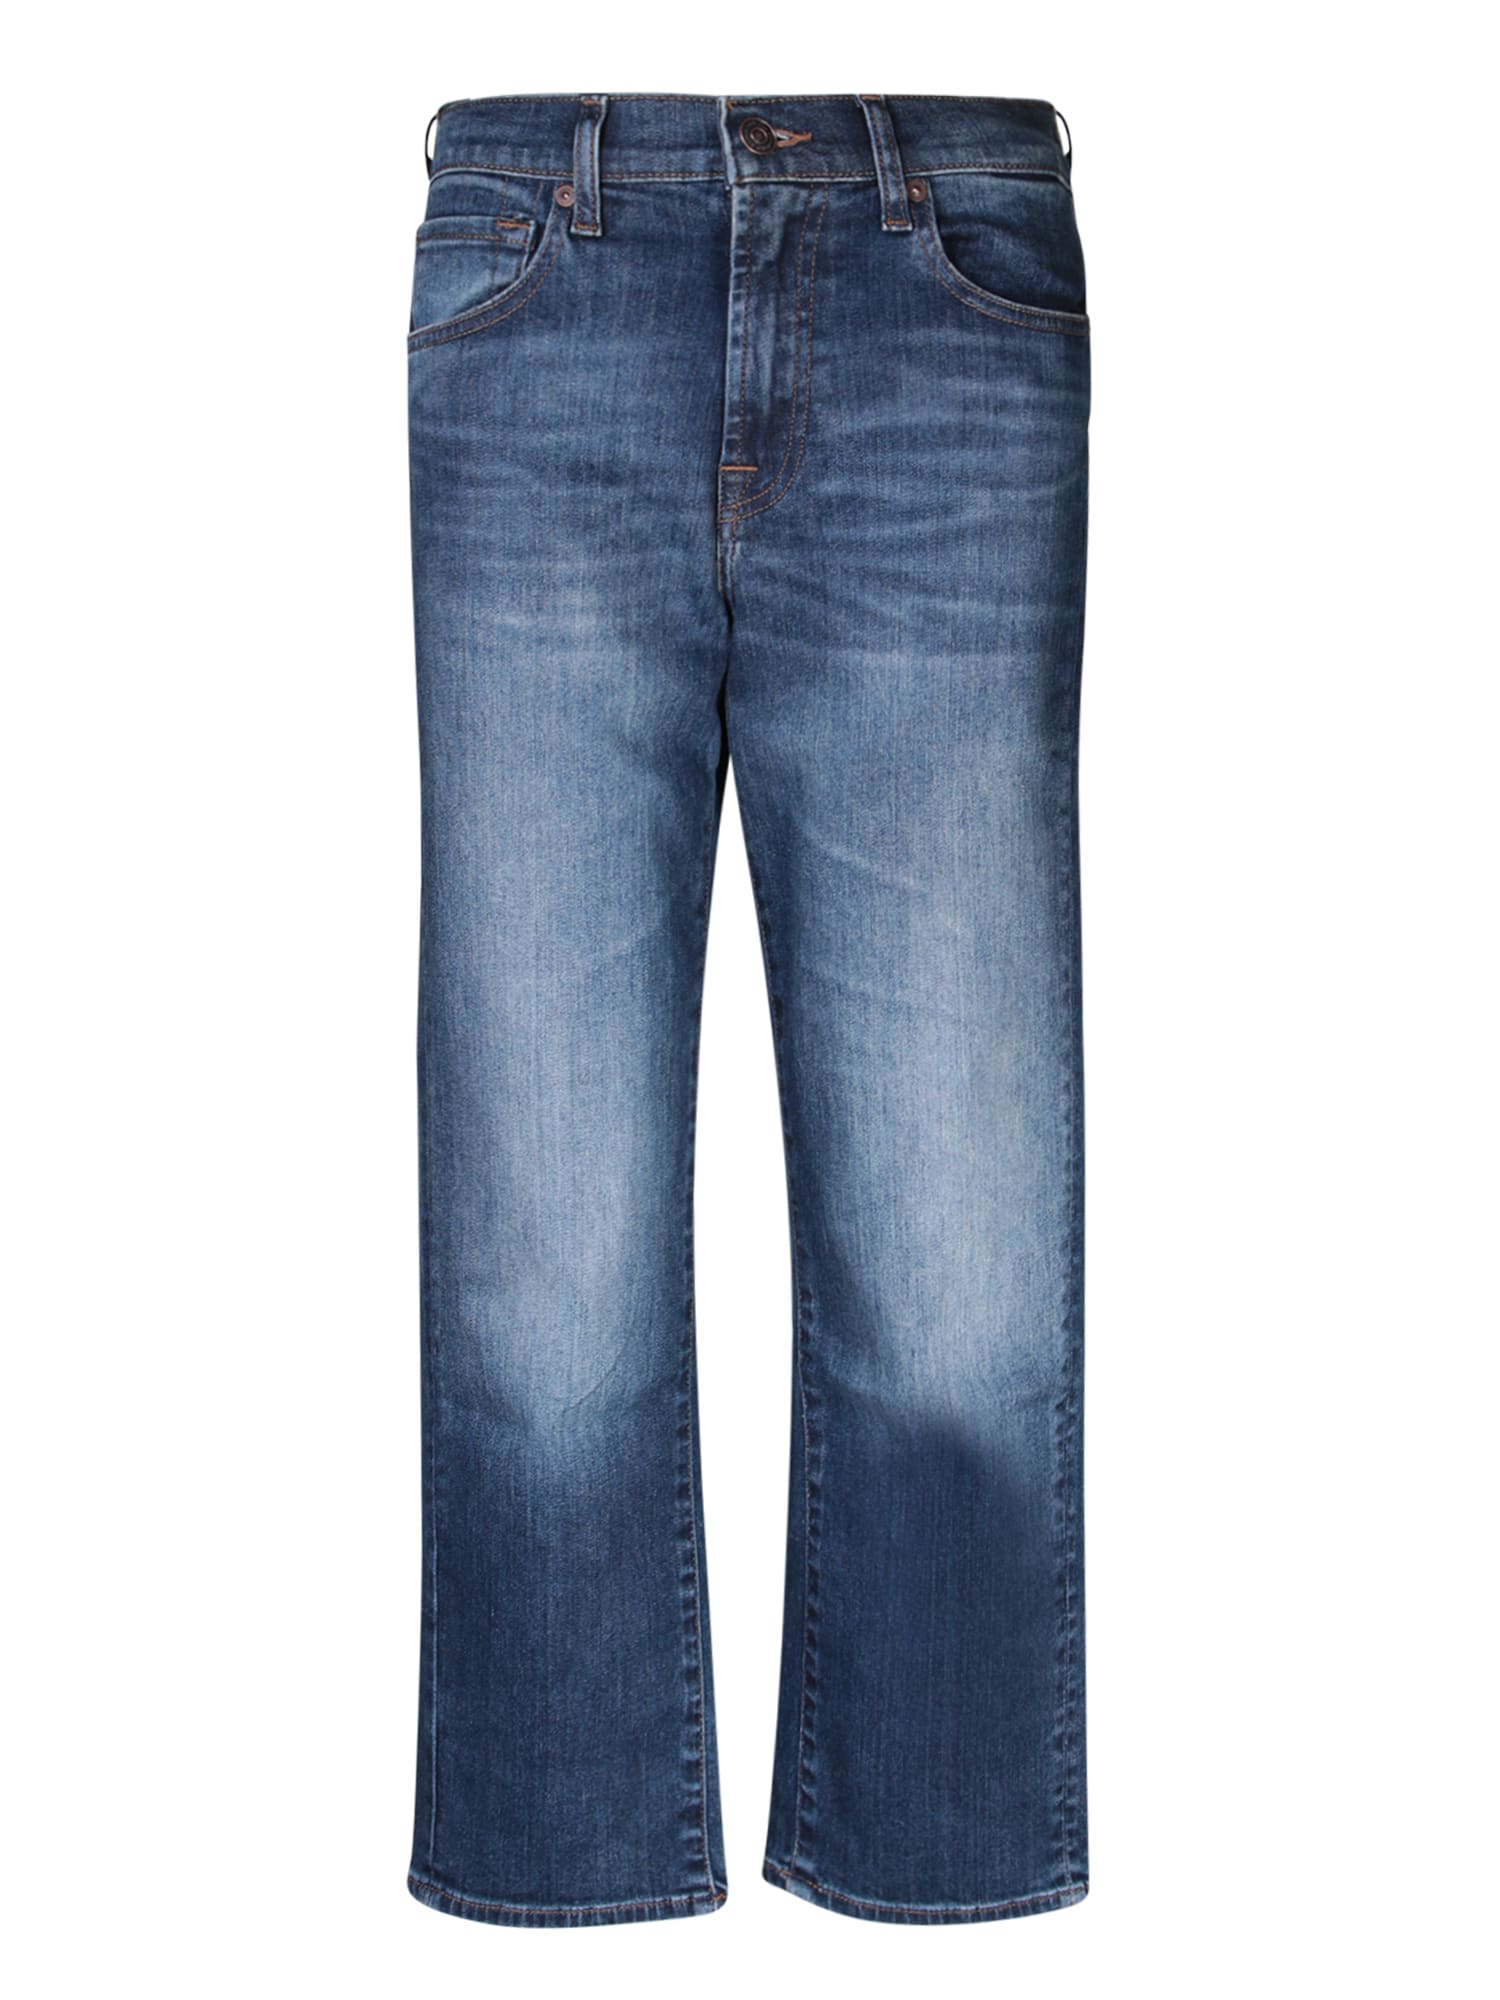 Shop 7 For All Mankind The Modern Straight Blue Jeans